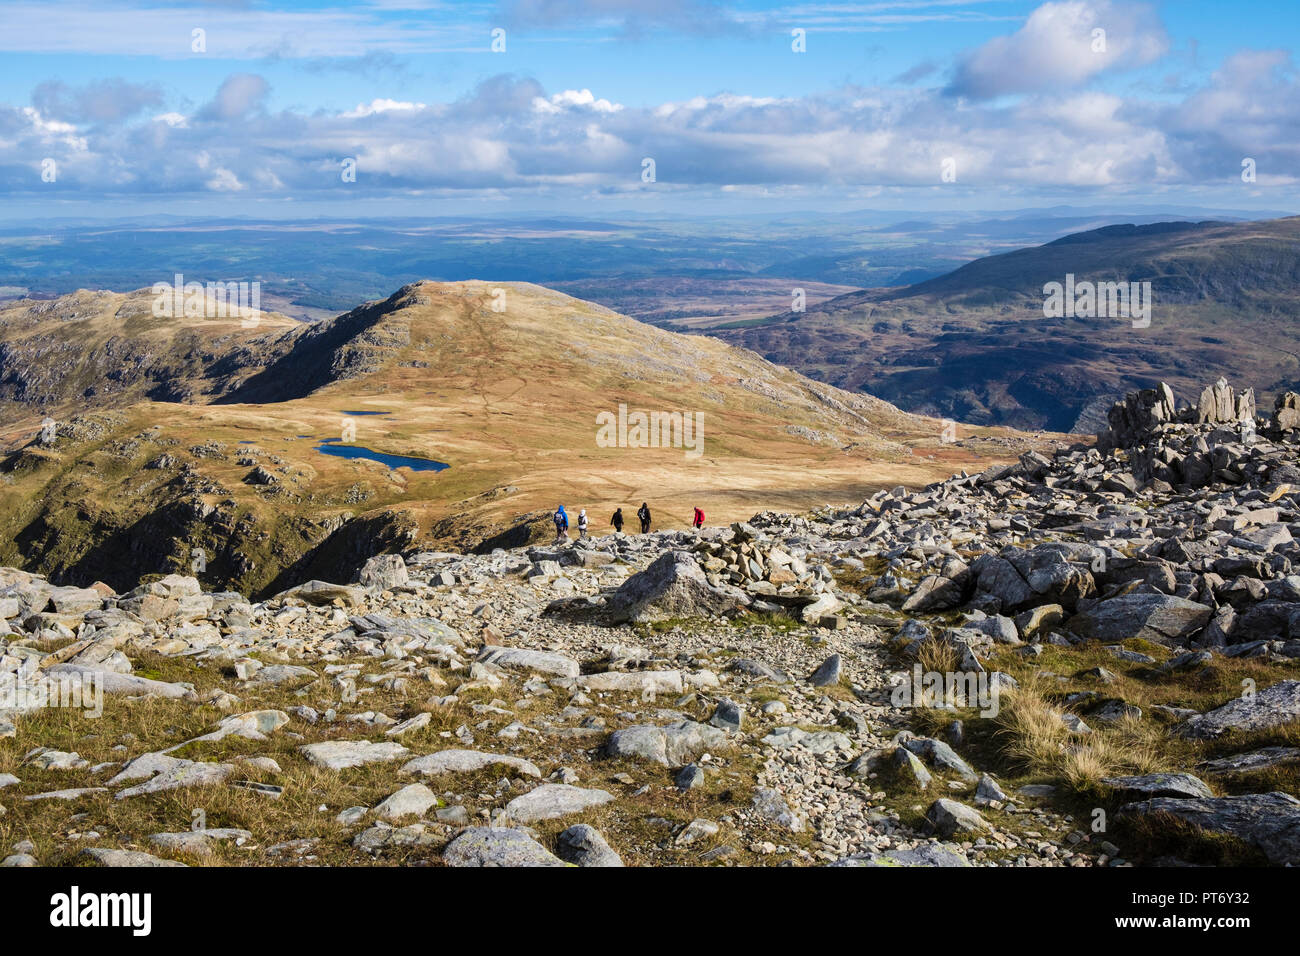 Stony path on descent from Glyder Fach mountain towards Foel Goch and Llyn Caseg-fraith in mountains of Snowdonia National Park. North Wales UK Stock Photo